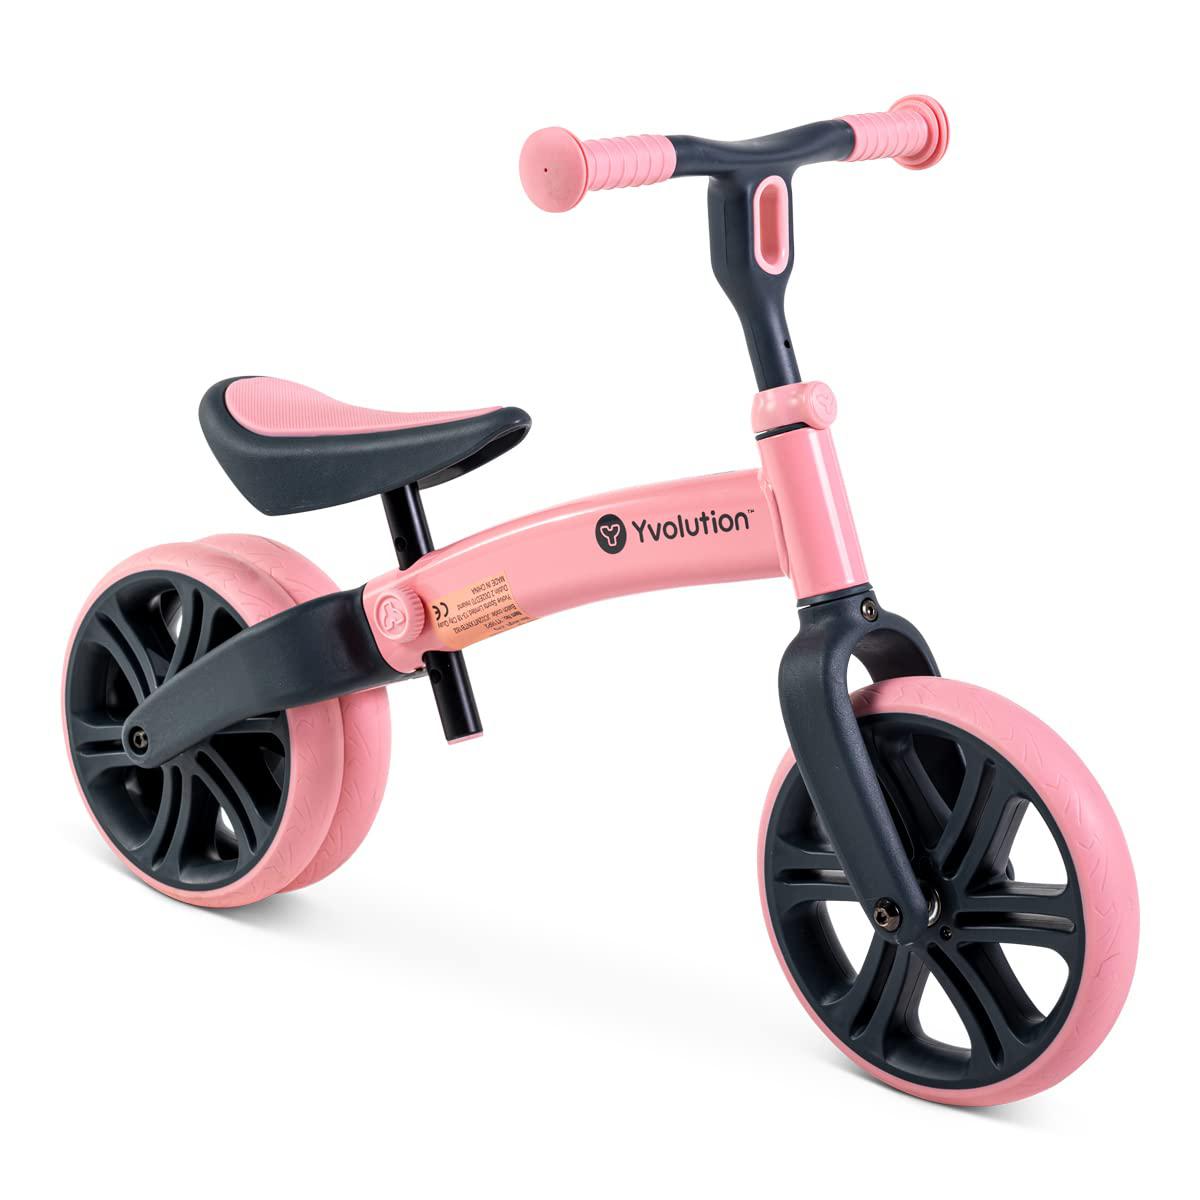 yvolution y velo junior toddler balance bike | 9 inch wheel no-pedal  training bike for kids age 18 months to 4 years (pink 20